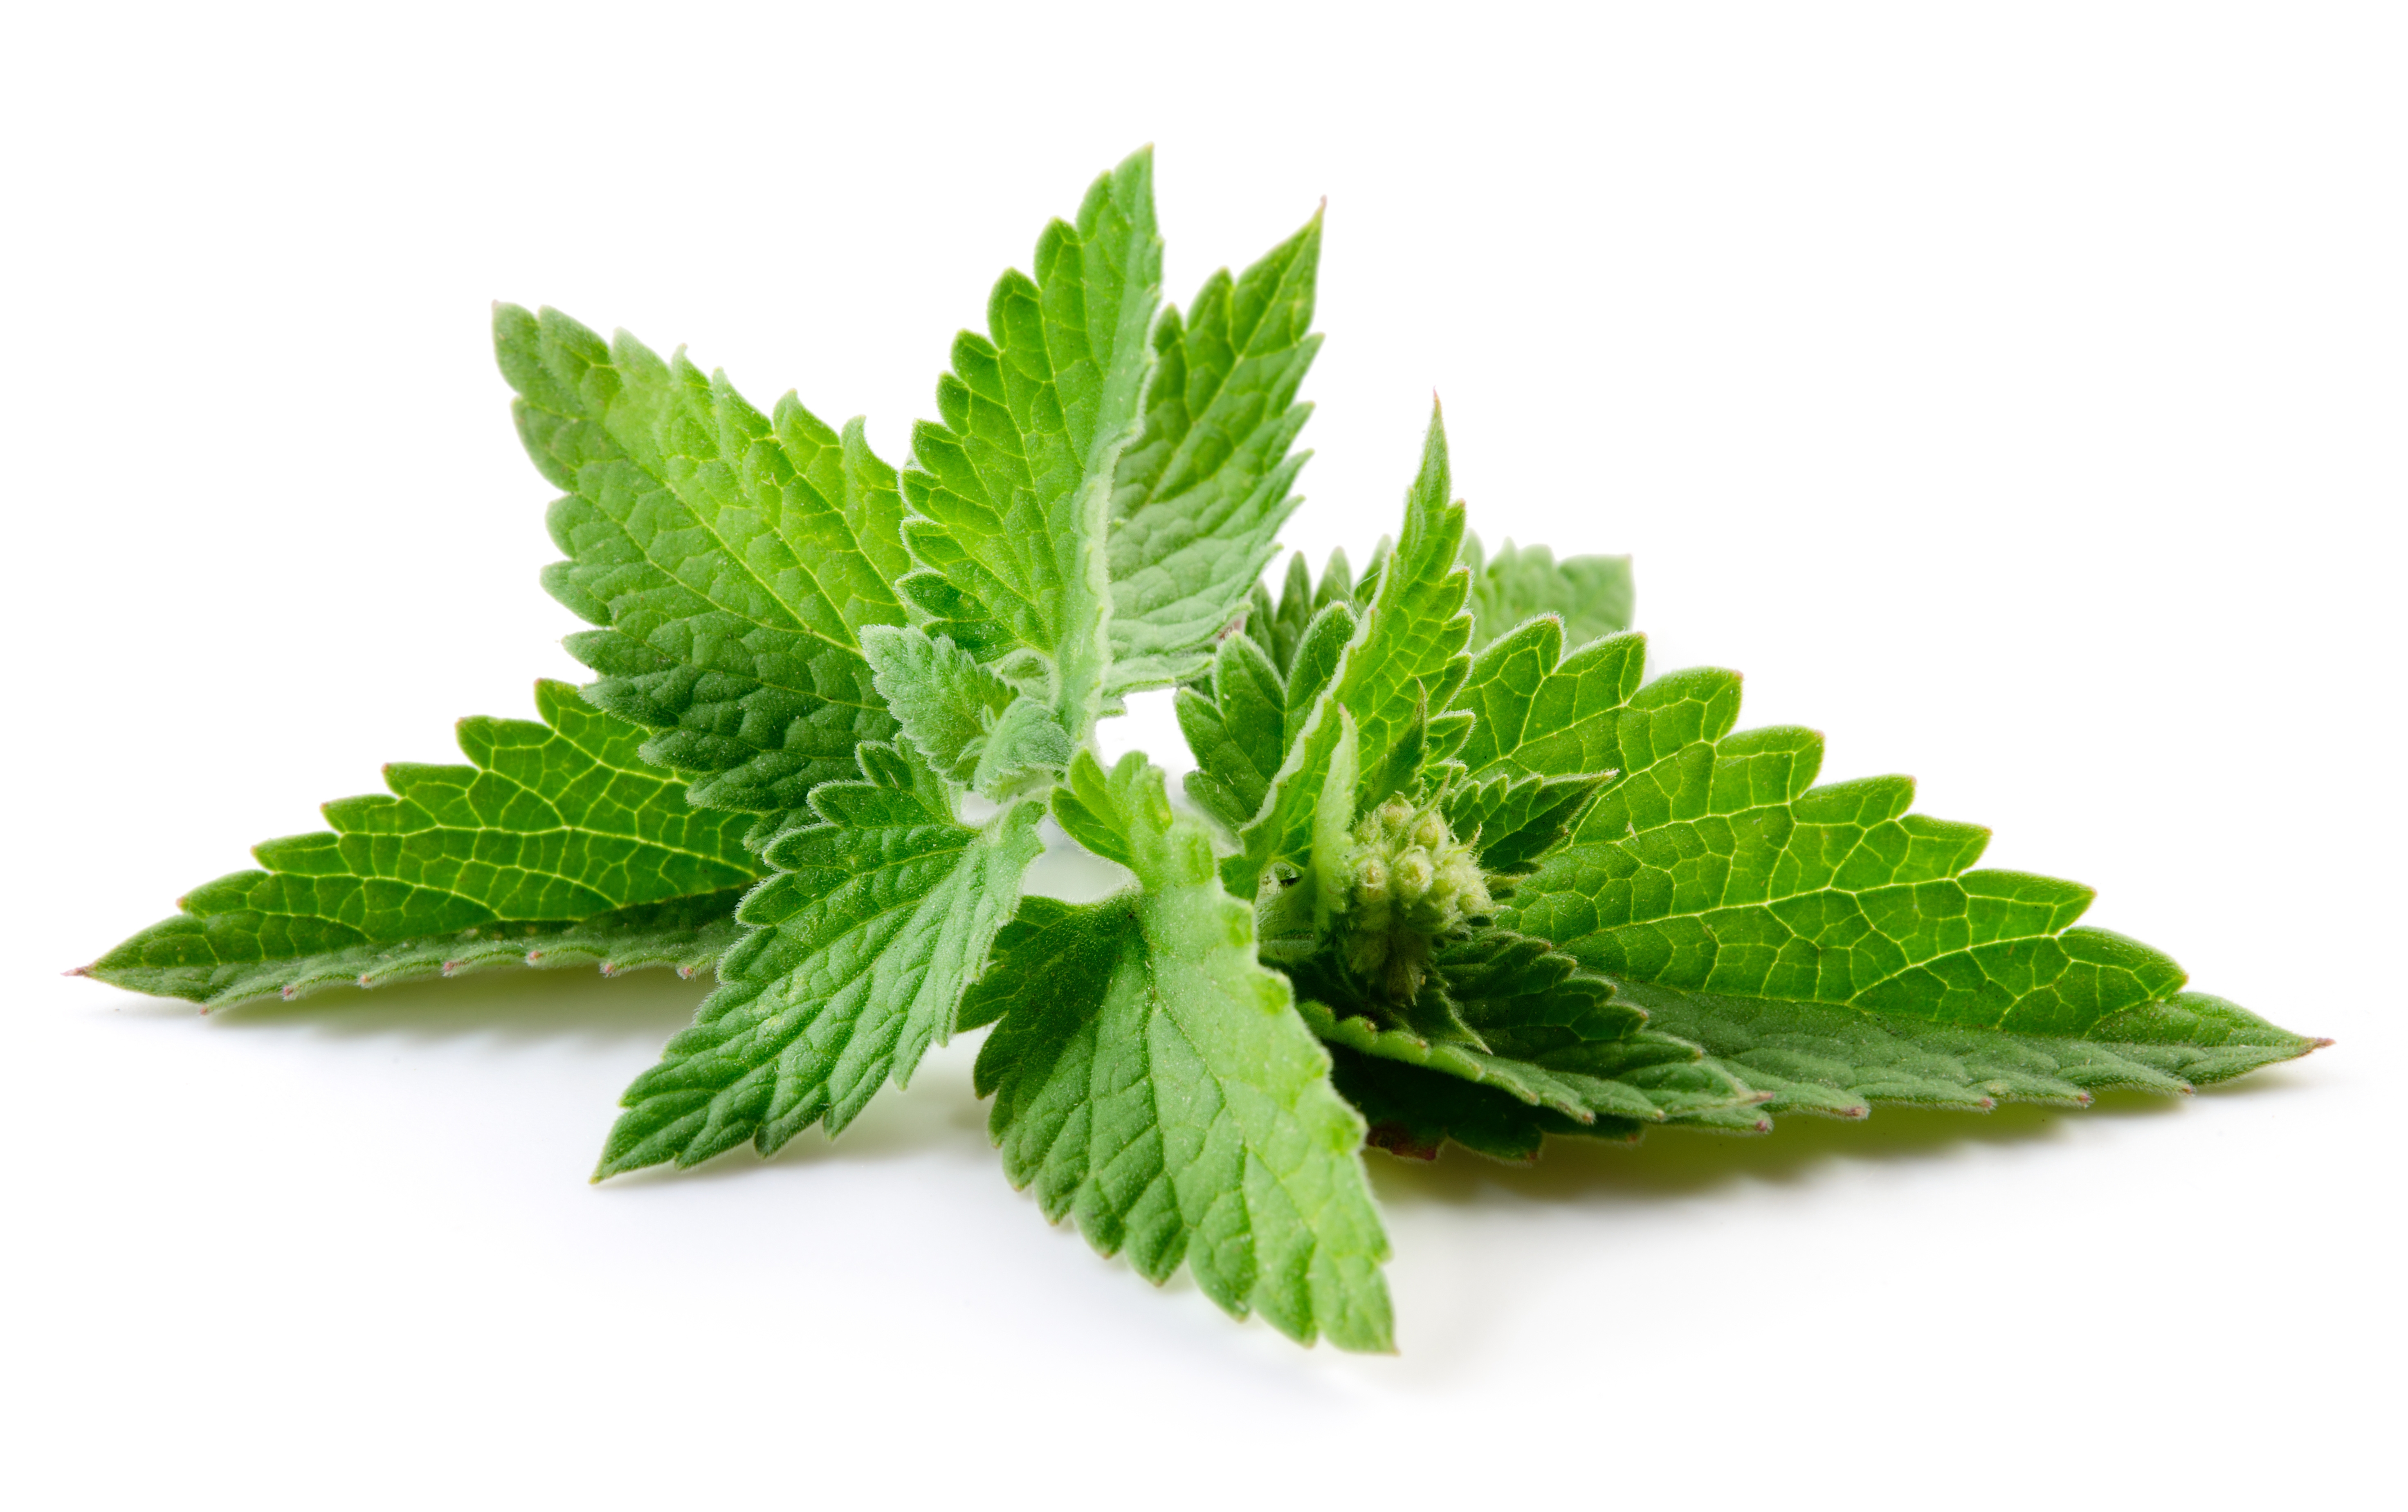 Benefits of Peppermint Oil